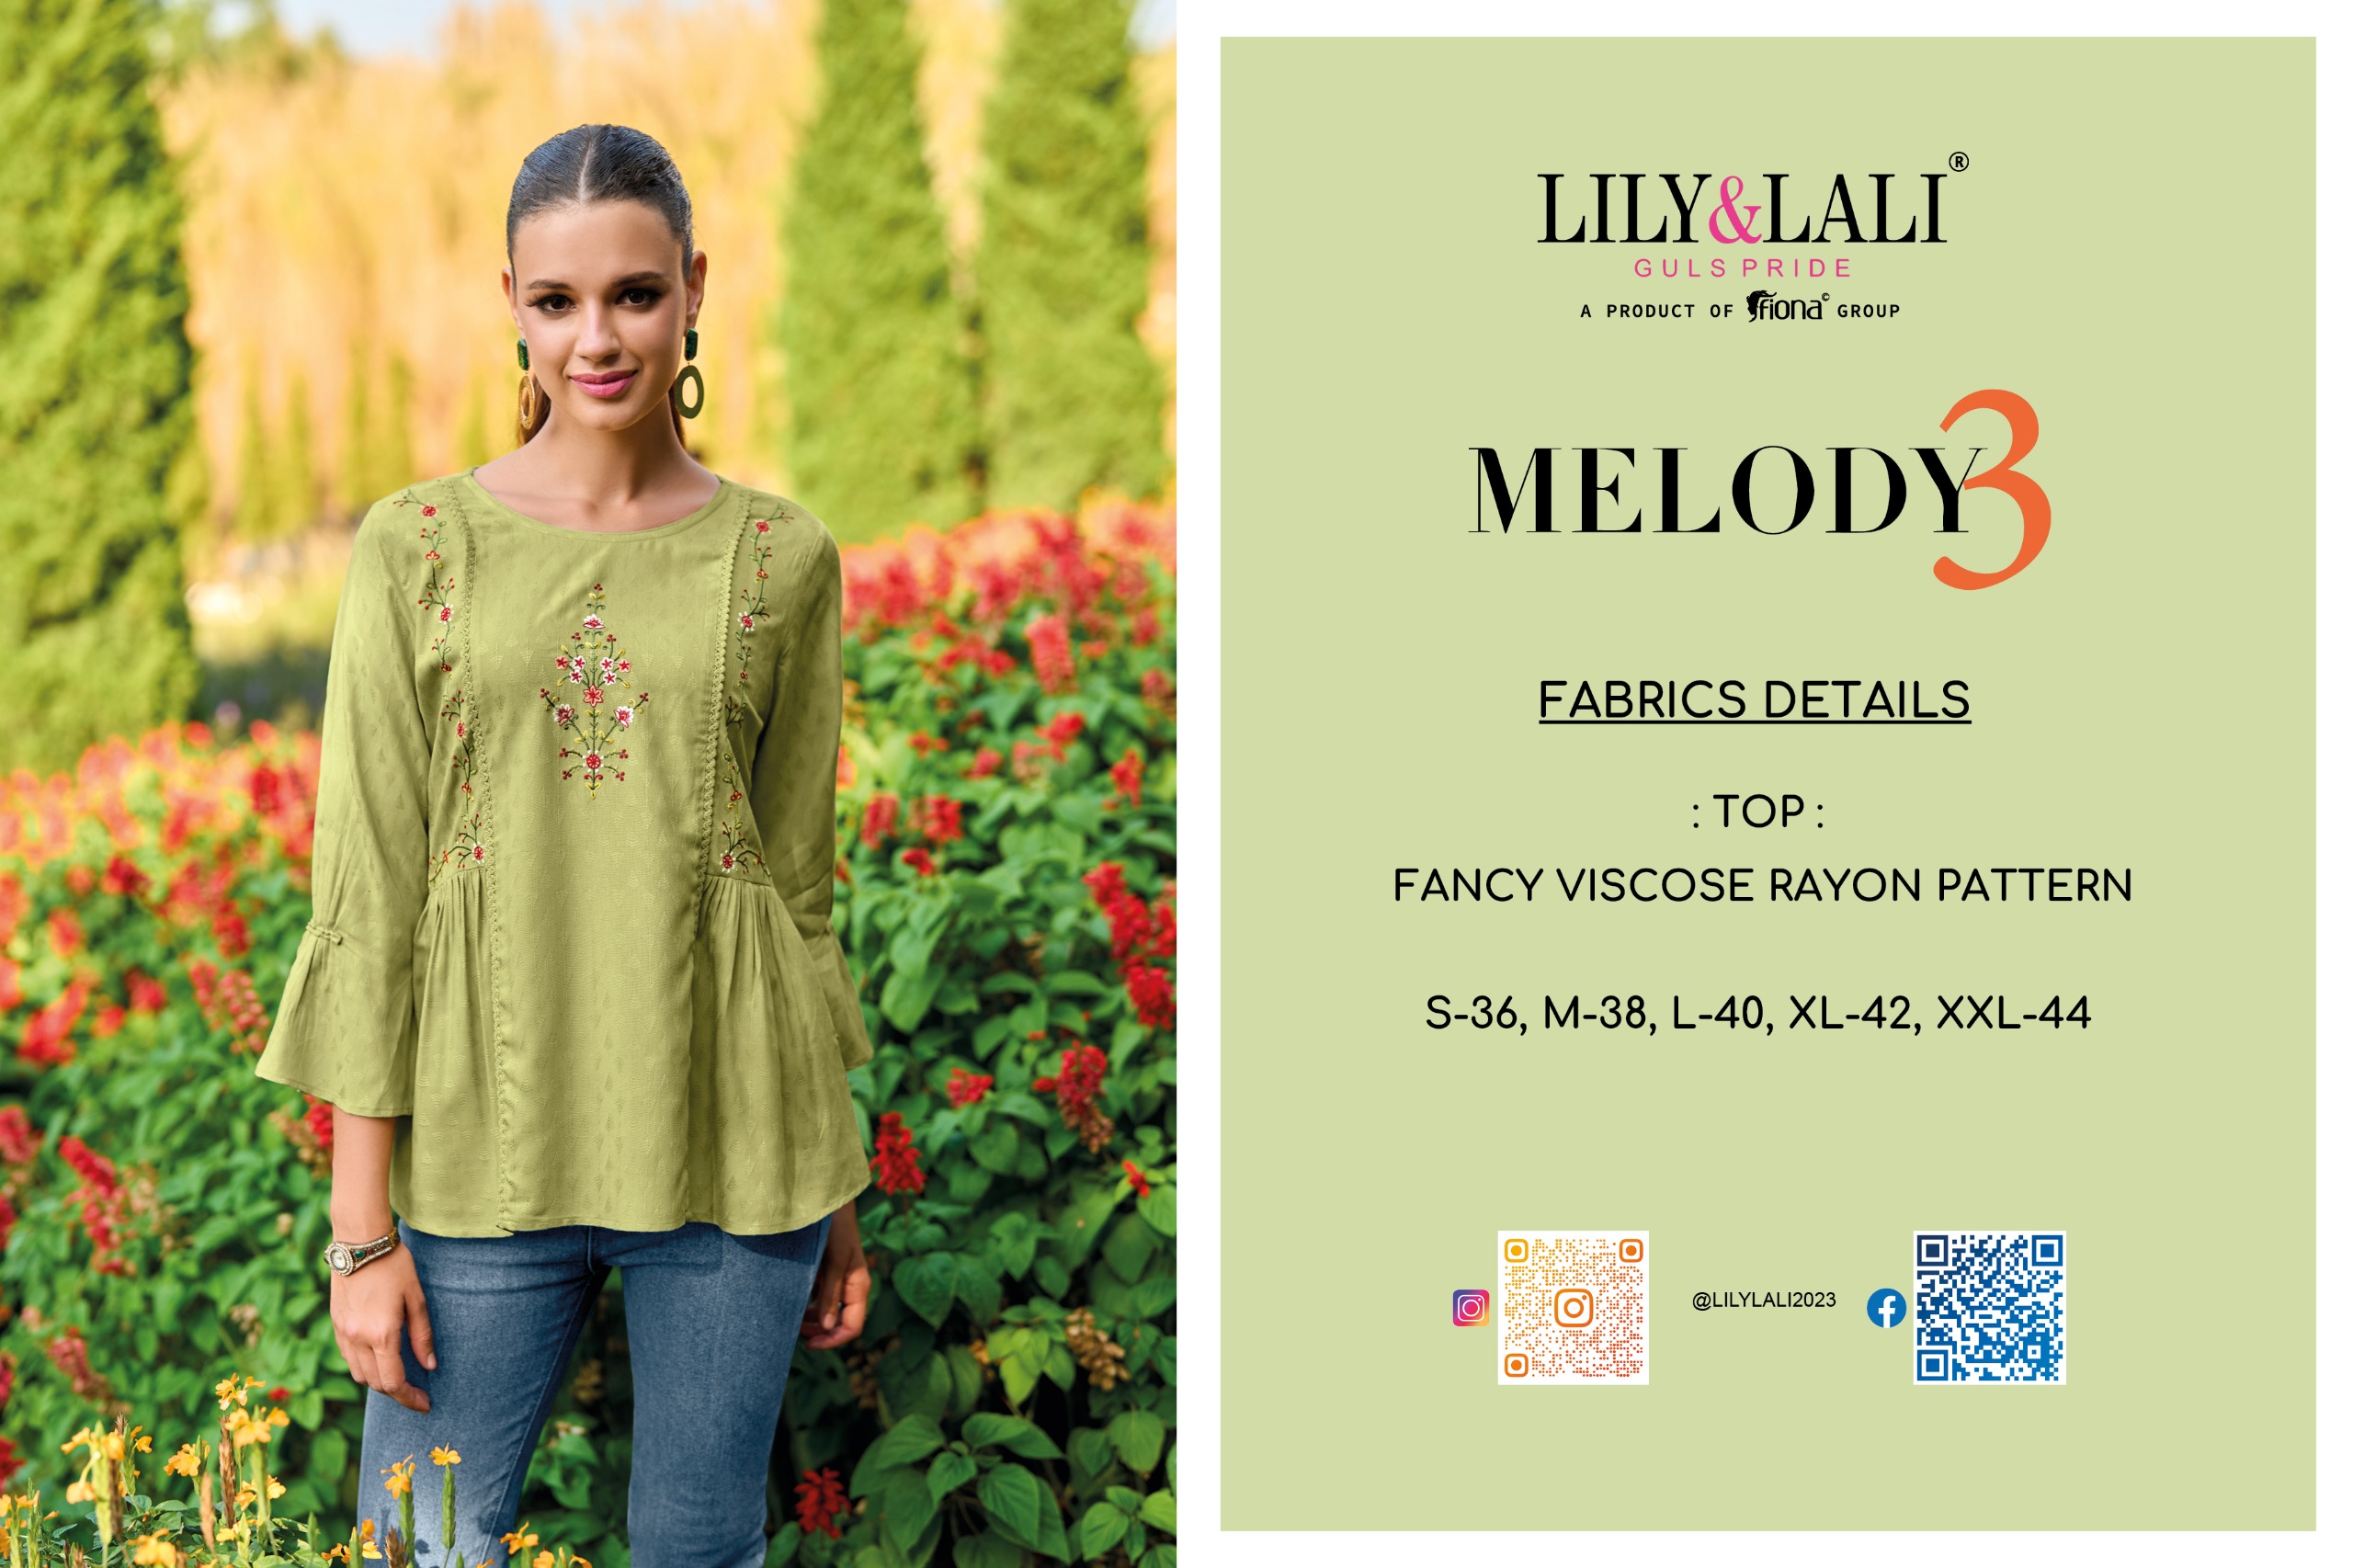 Lily And Lali Melody 3 collection 7